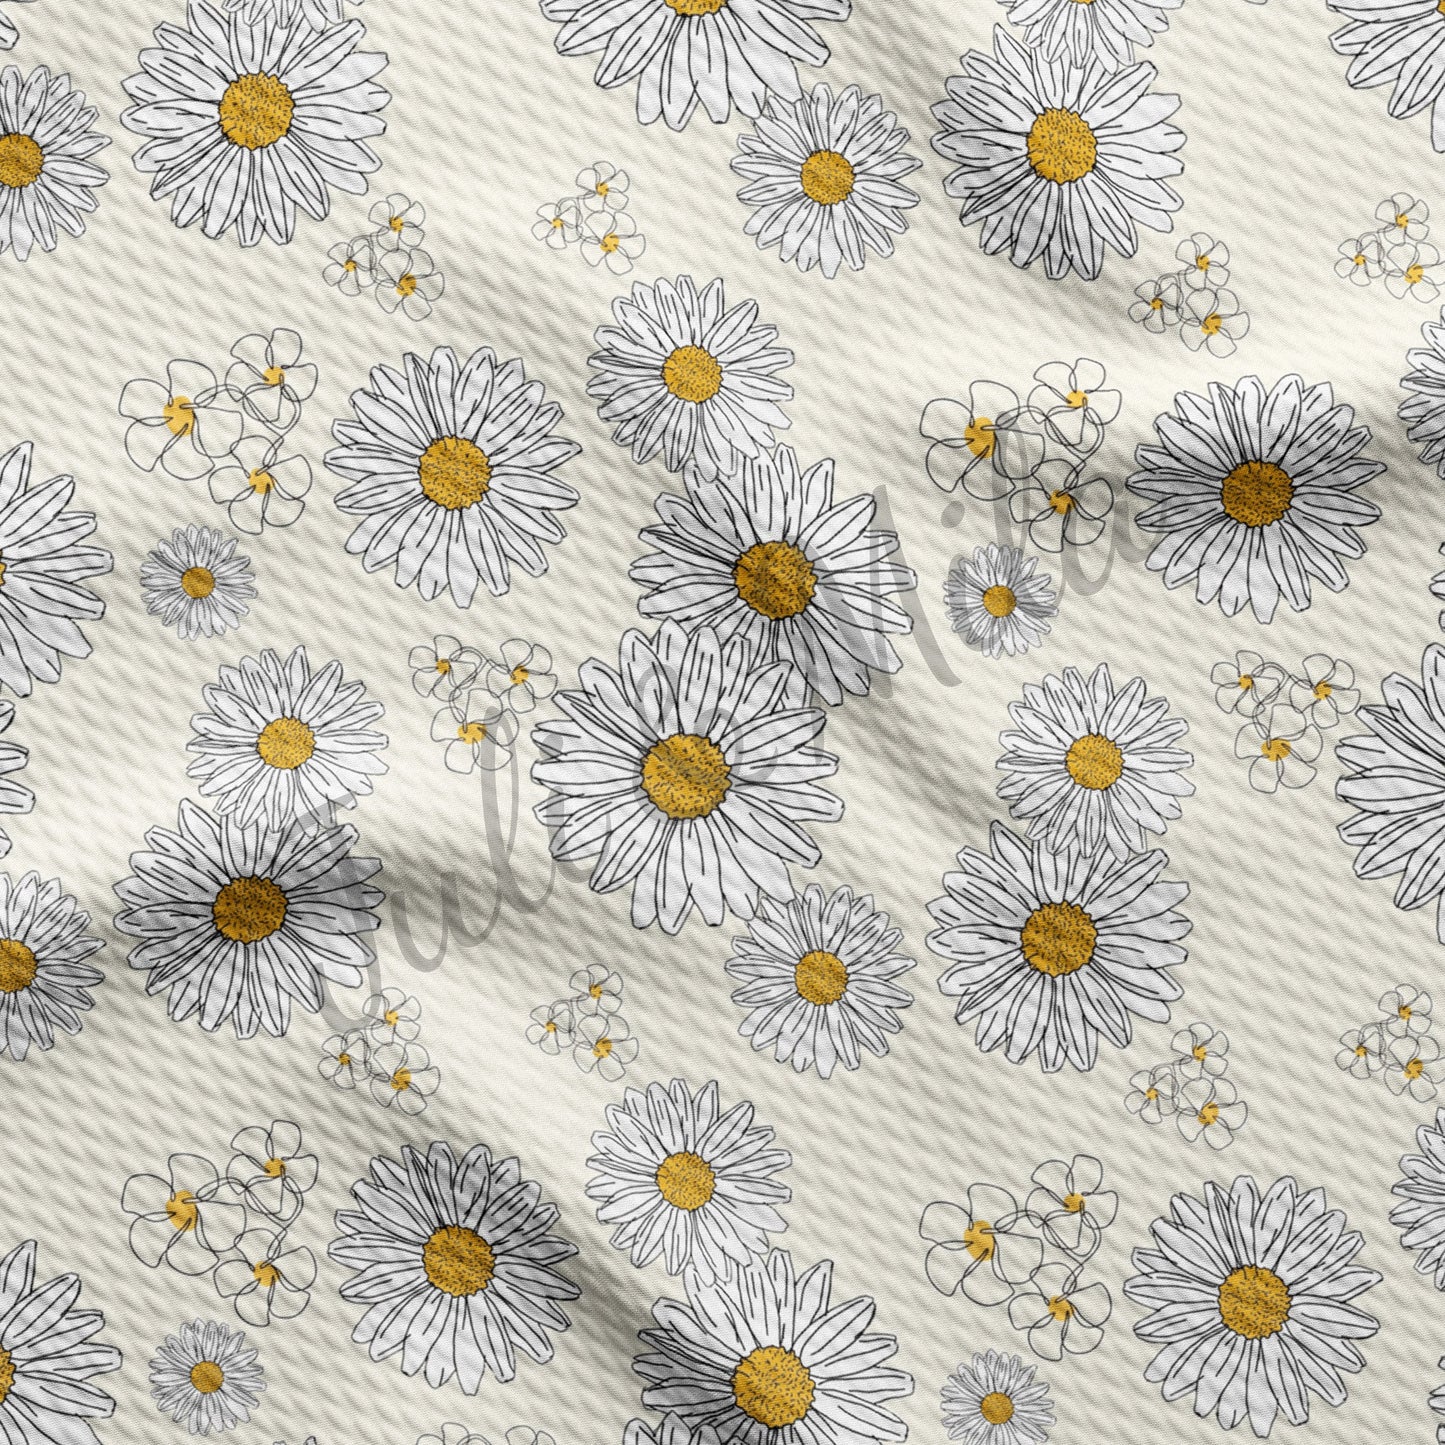 Floral Bullet Textured Fabric Floral79